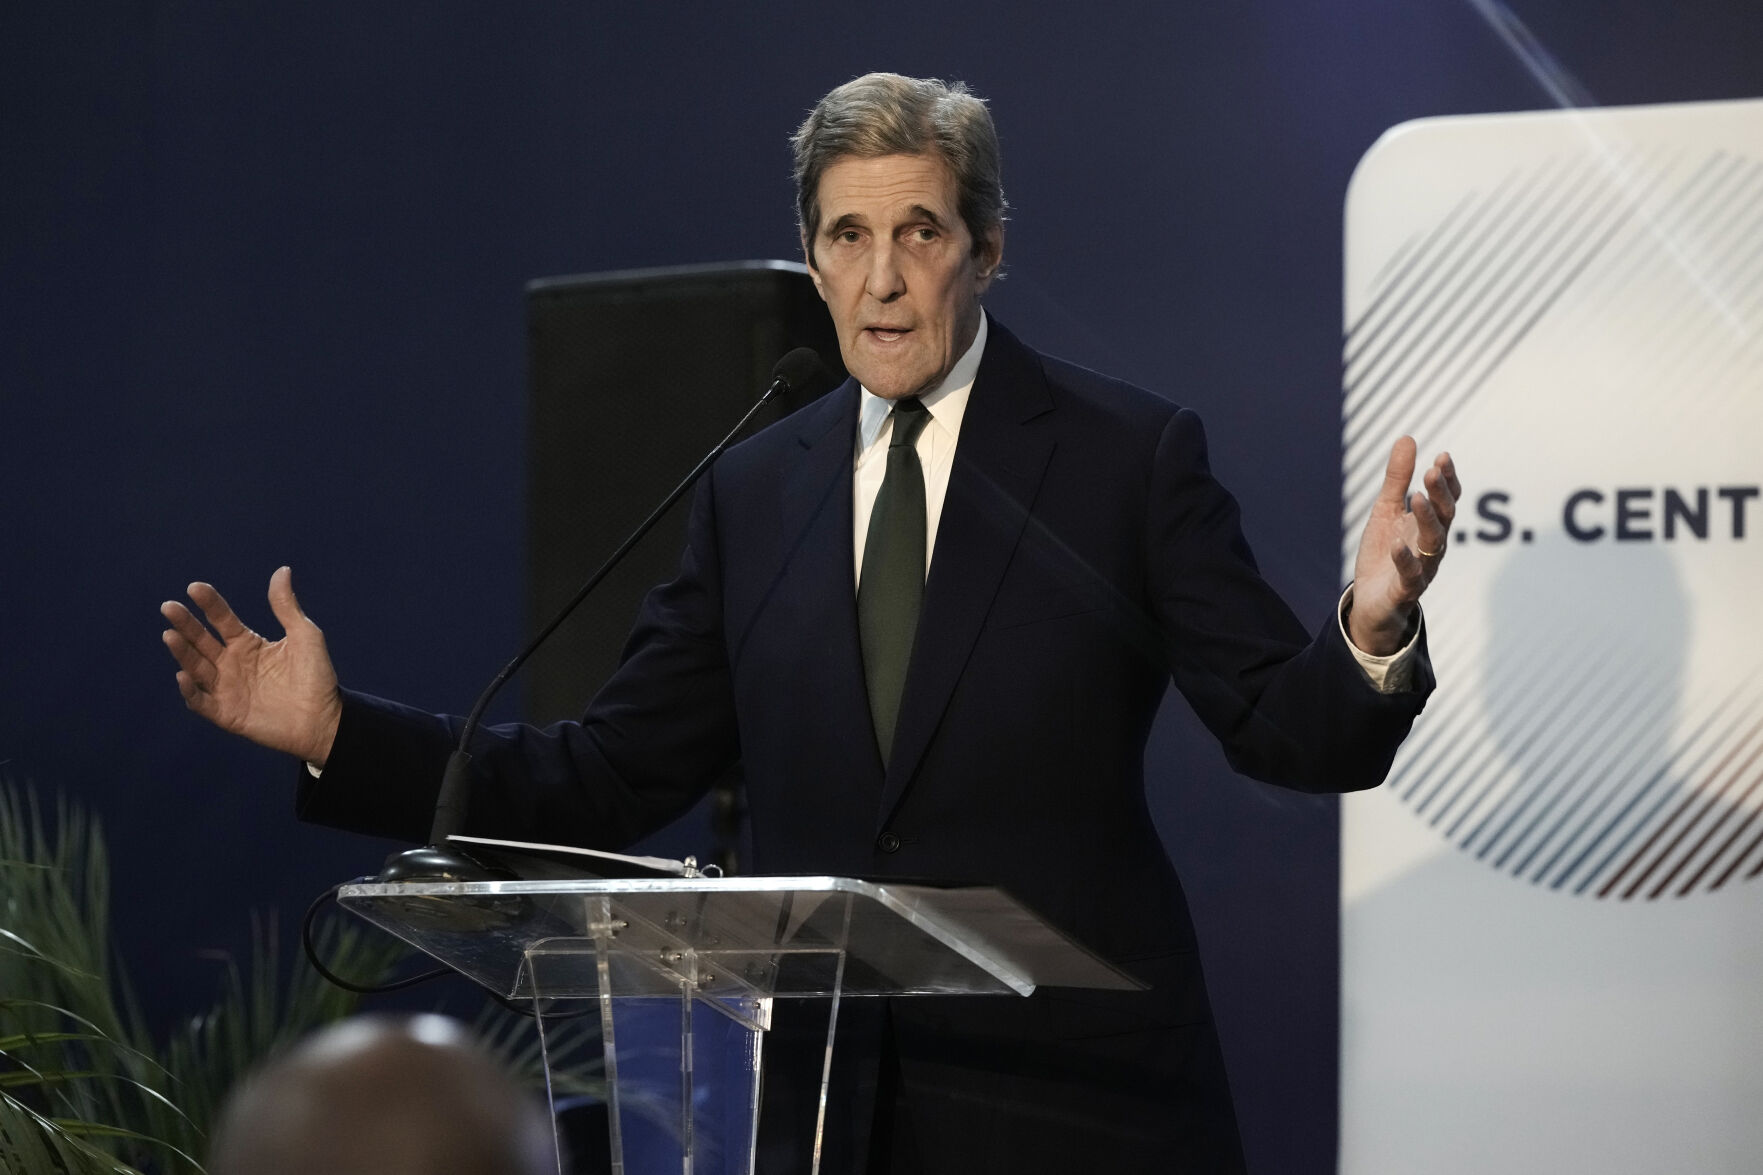 <p>U.S. Special Presidential Envoy for Climate John Kerry speaks at the opening of the U.S. Pavilion at the COP27 U.N. Climate Summit, Tuesday, Nov. 8, 2022, in Sharm el-Sheikh, Egypt. (AP Photo/Nariman El-Mofty)</p>   PHOTO CREDIT: Nariman El-Mofty - staff, AP